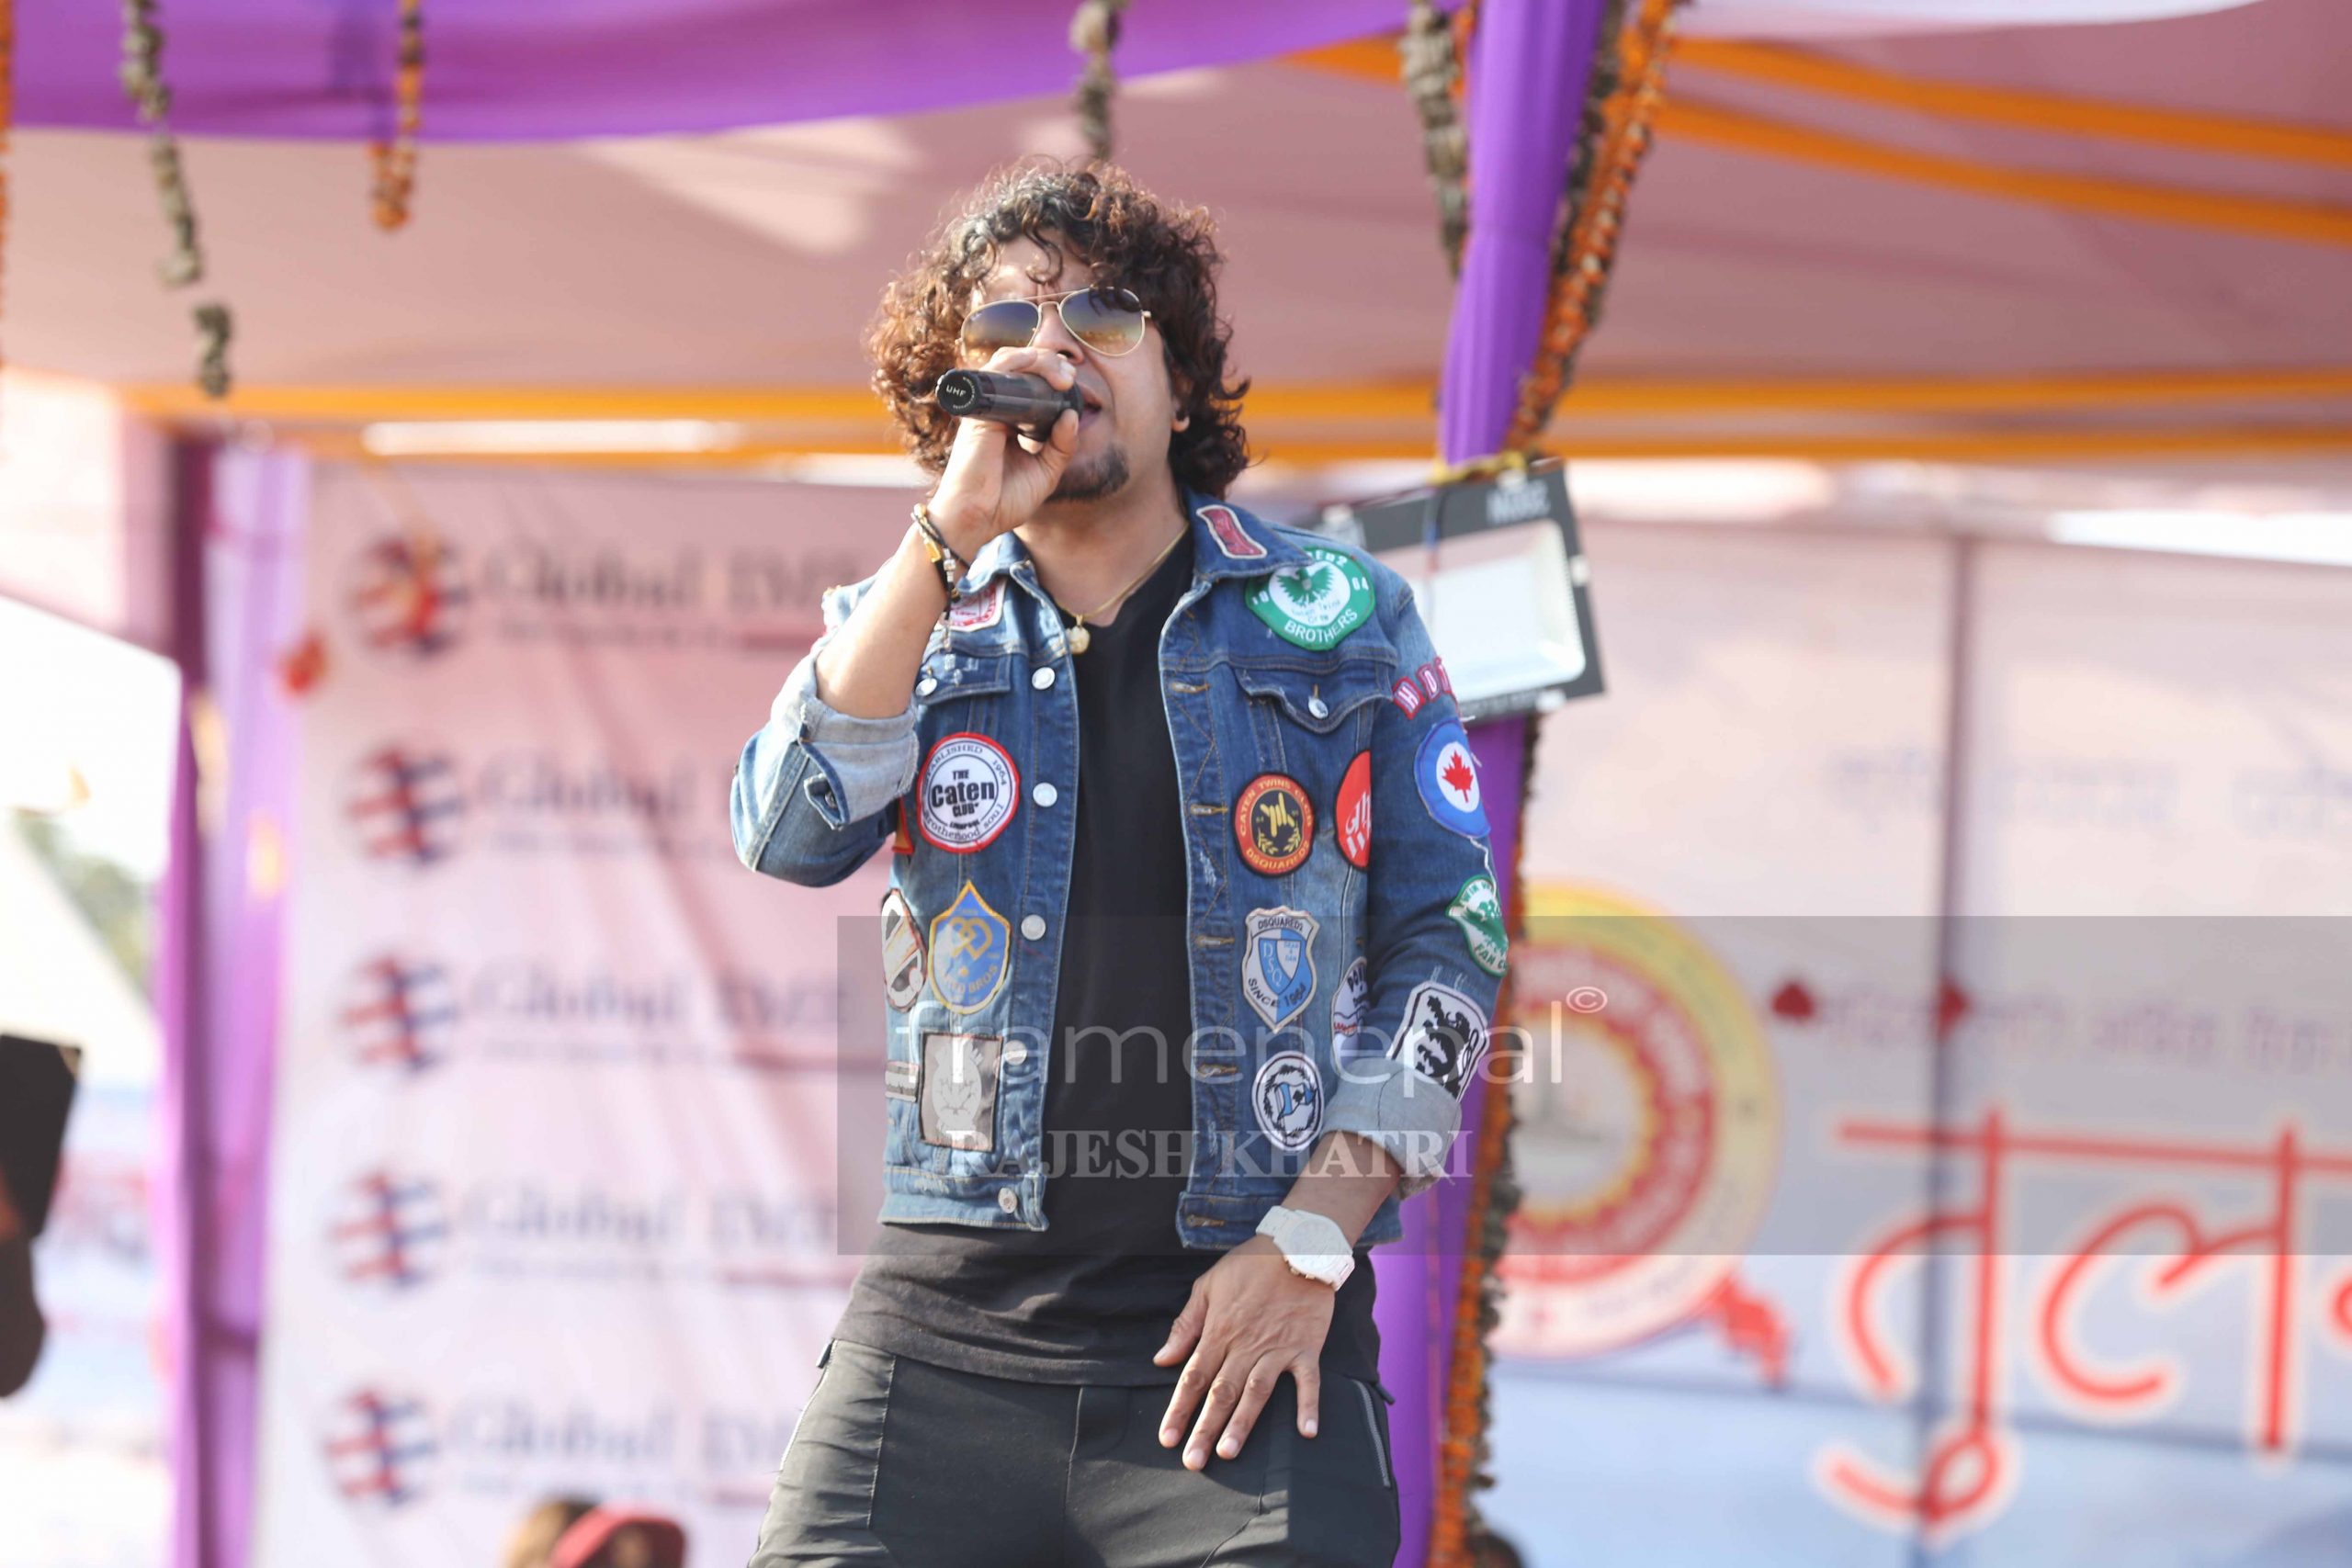 Pramod Kharel, Best Images For Pramod Kharel by frame nepal, Pramod Kharel About,Pramod Kharel is a Nepalese singer, He is a versatile singer of the Nepali music industry, He has recorded more than 2000 songs of different genres, He is a coach in The Voice of Nepal Season 1 & 2, pramod kharel songs, pramod kharel maya, pramod kharel wife, pramod kharel new song, pramod kharel 2076, pramod kharel new song 2020, pramod kharel malai maaf, pramod kharel marriage,